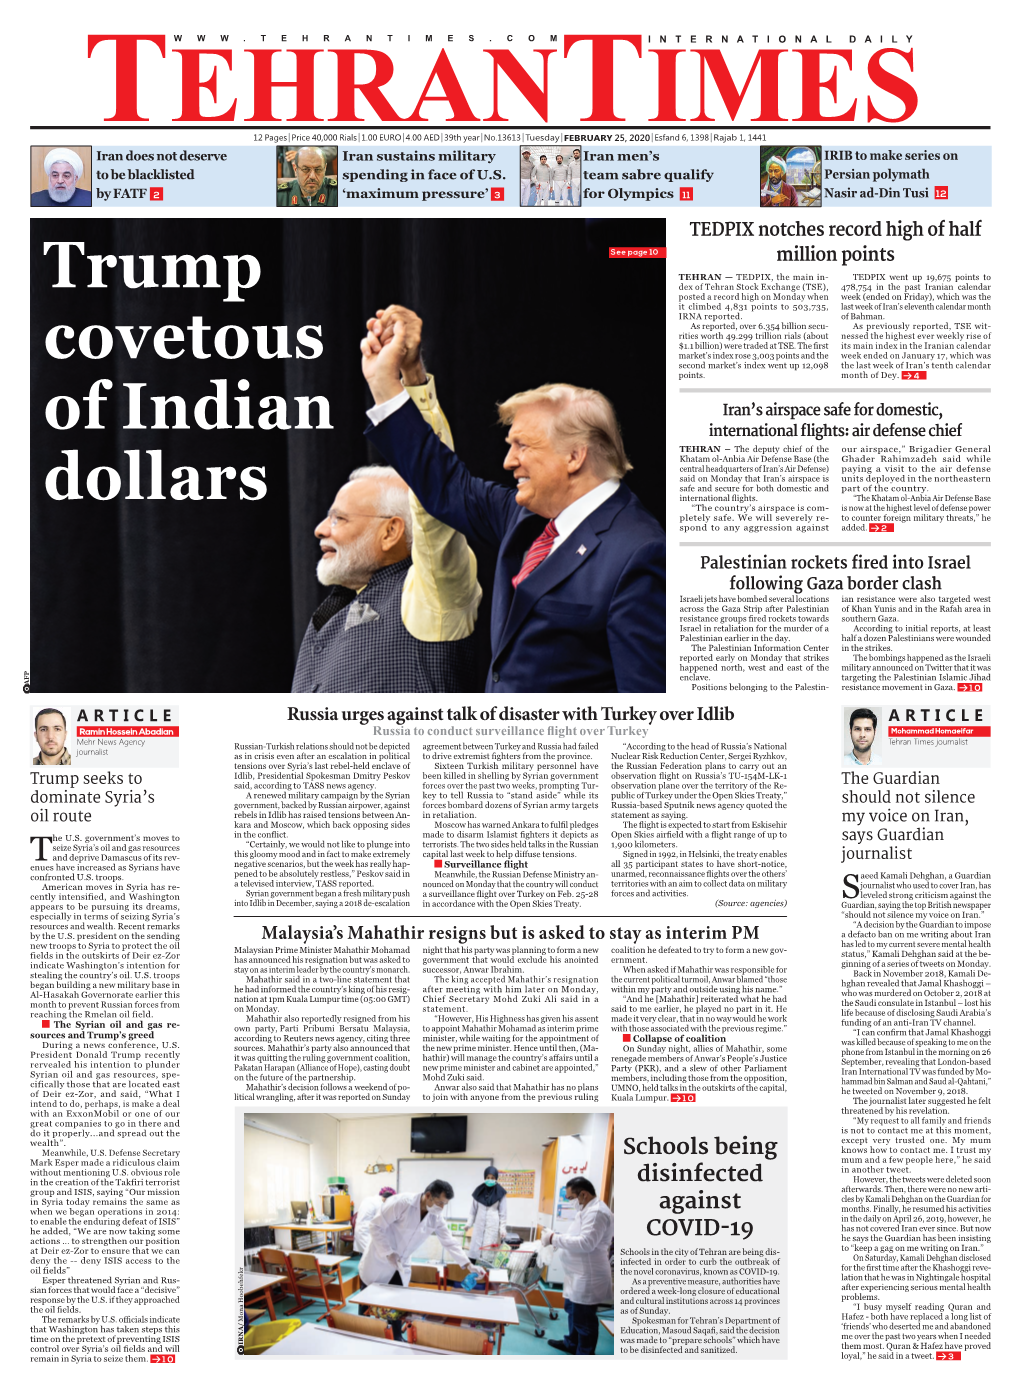 Trump Covetous of Indian Dollars the Coalition Government, and a Political Realignment in Malaysia